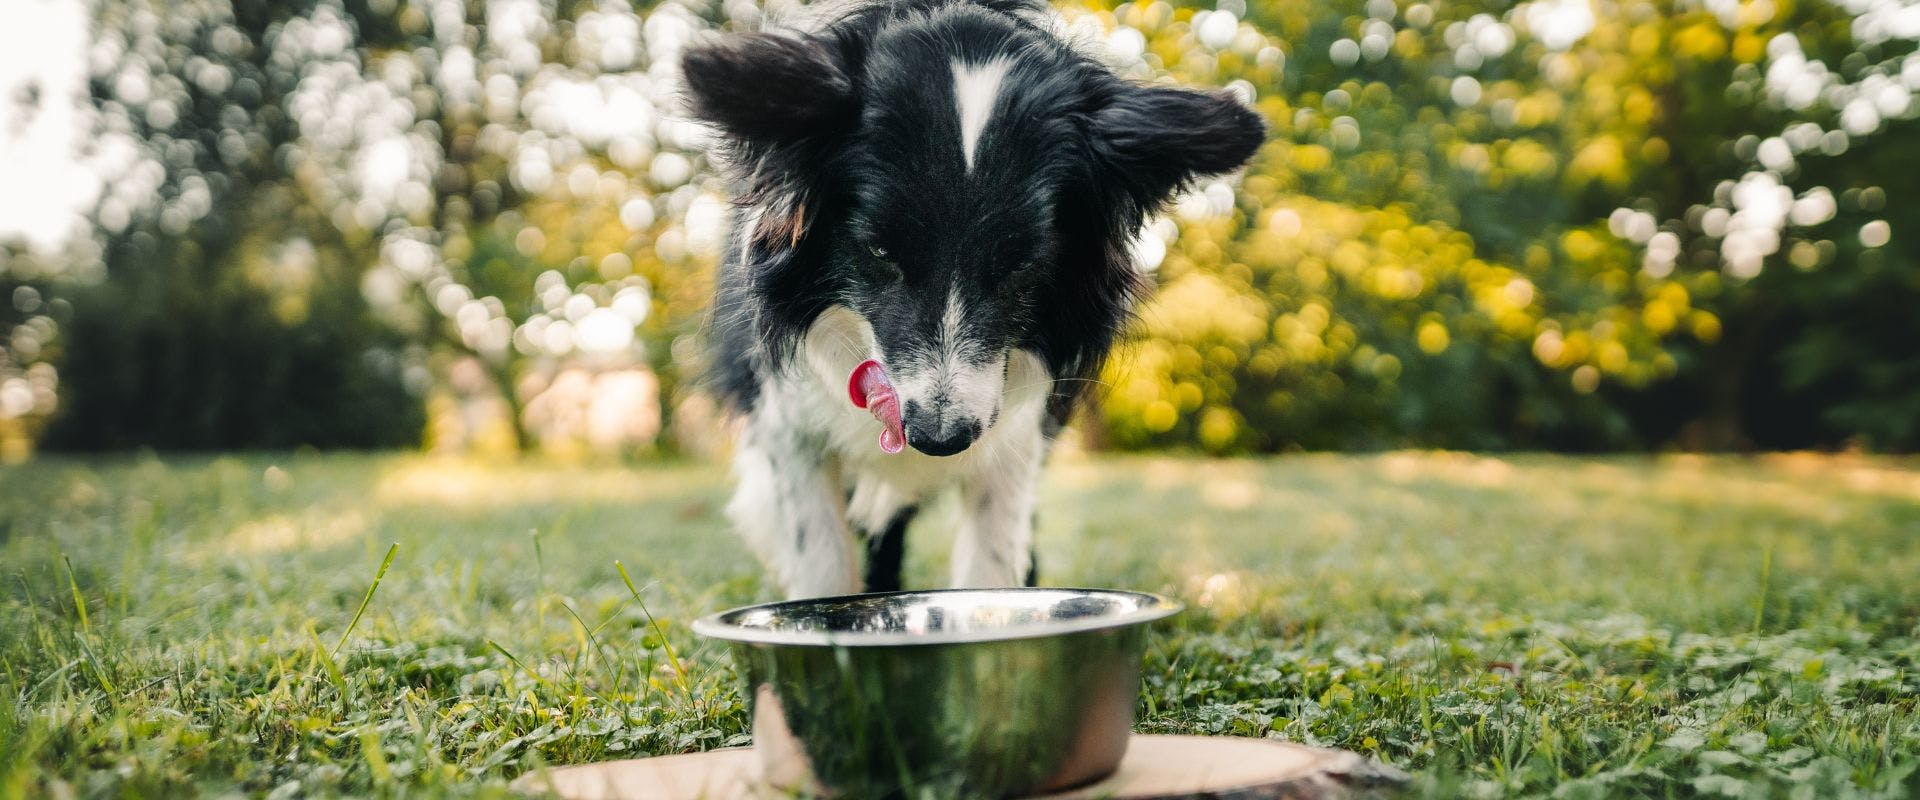 Border Collie eating from a metal bowl